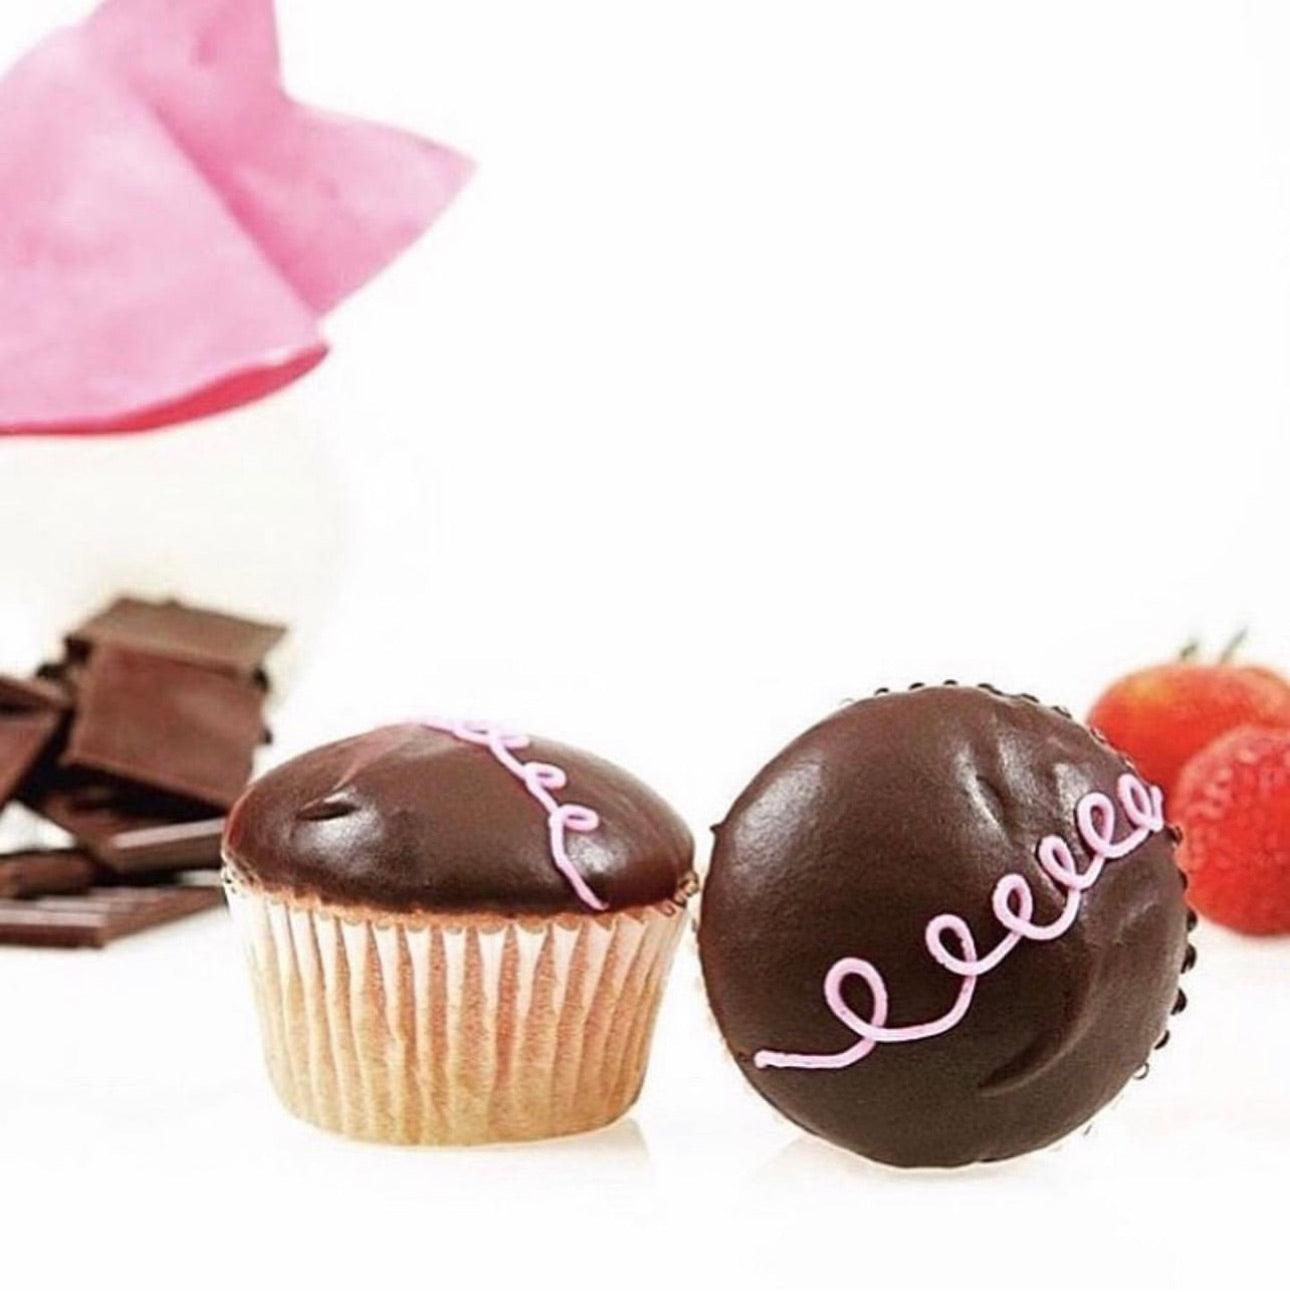 Chocolate Covered Strawberries | Cupcakes - Sift Dessert Bar